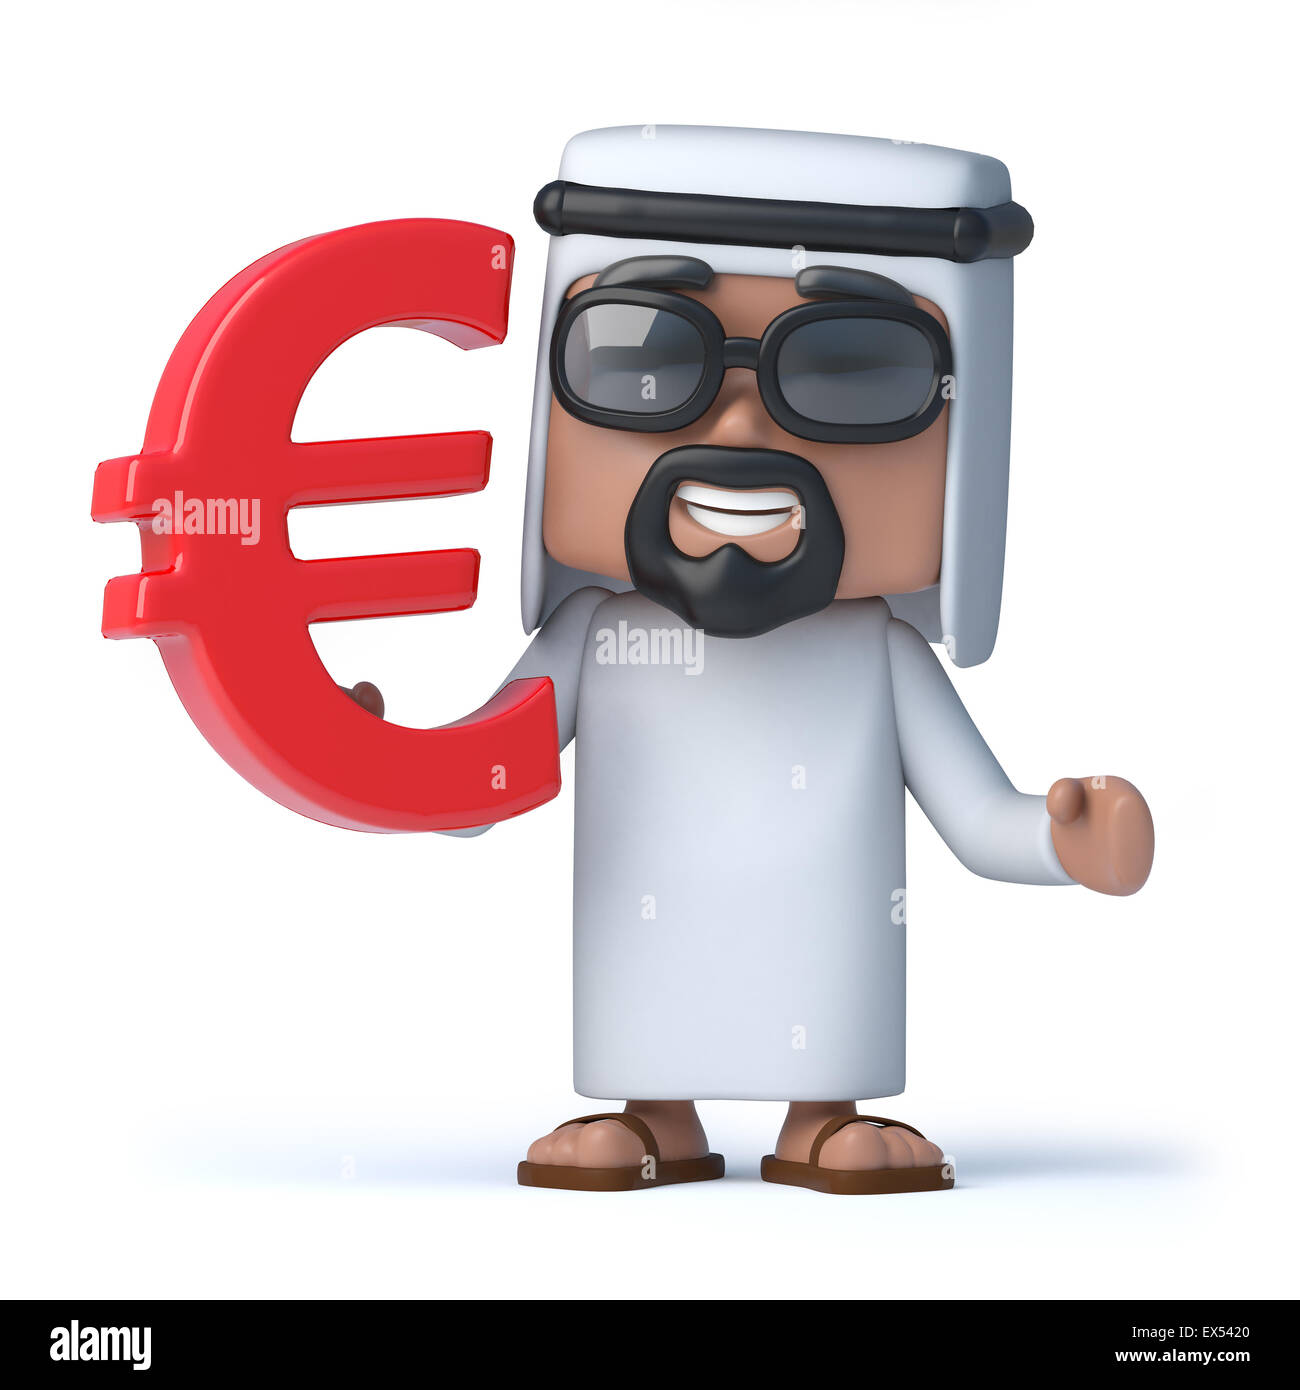 3d render of an Arab sheik holding a Euro currency symbol Stock Photo